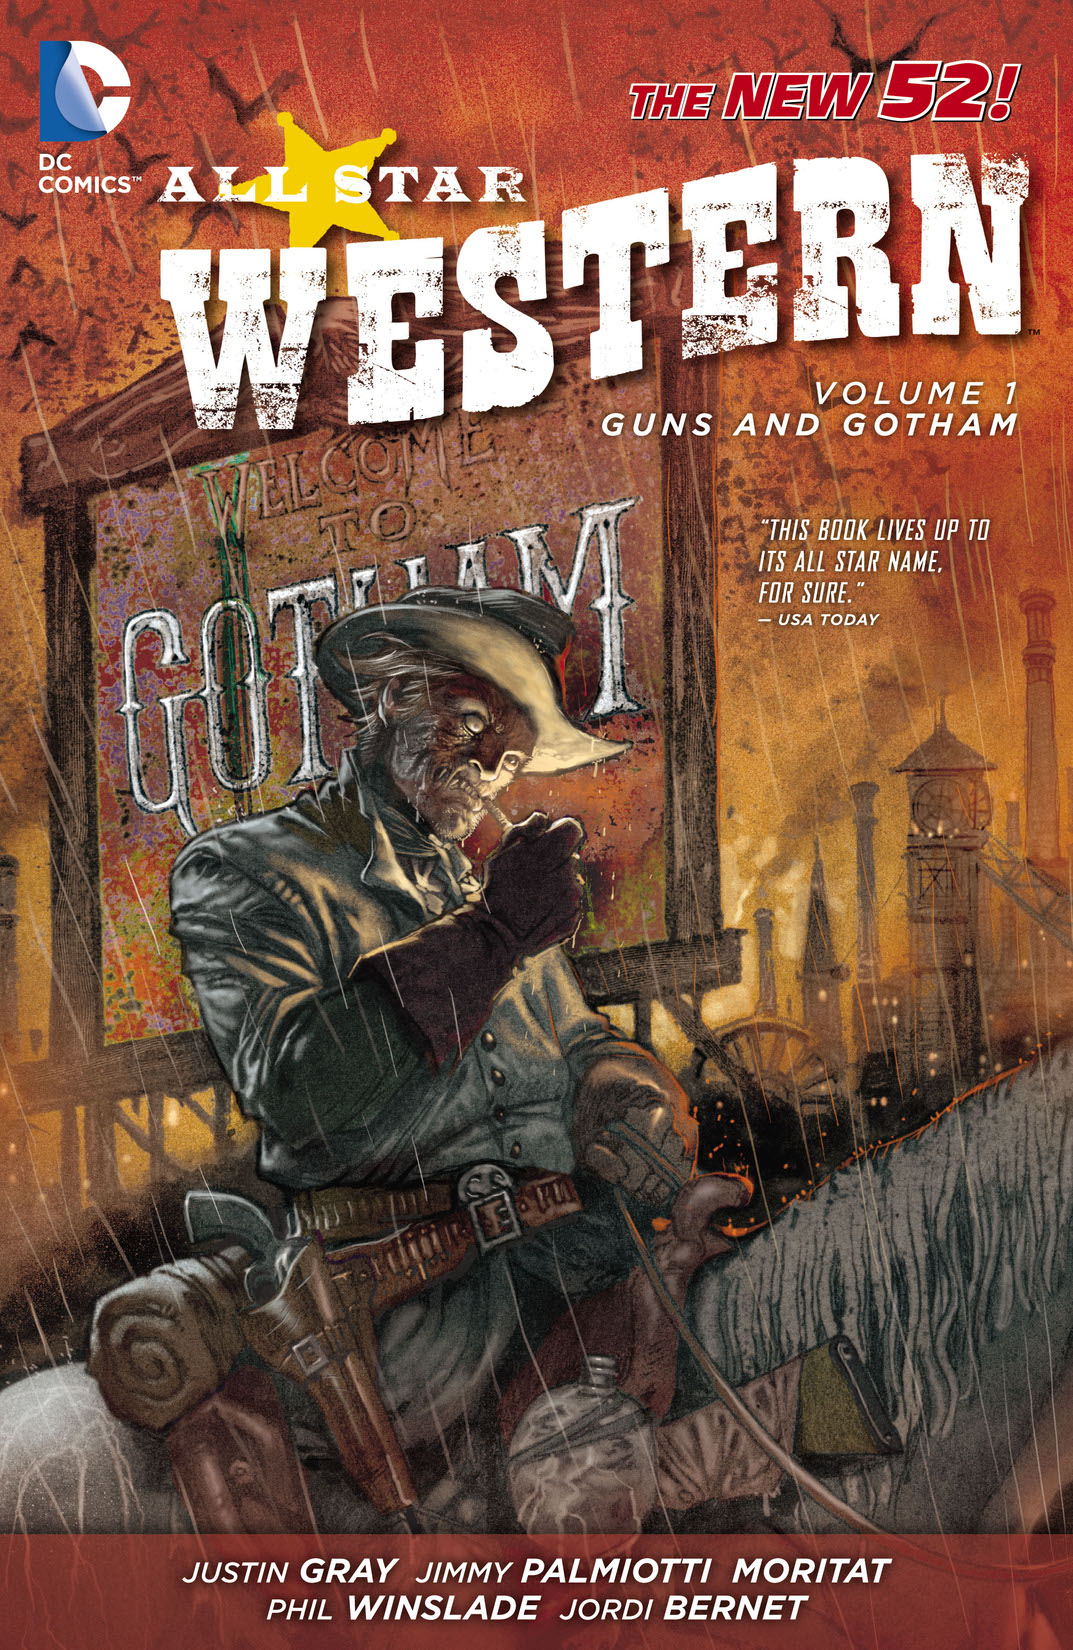 All Star Western Vol. 1: Guns and Gotham preview images